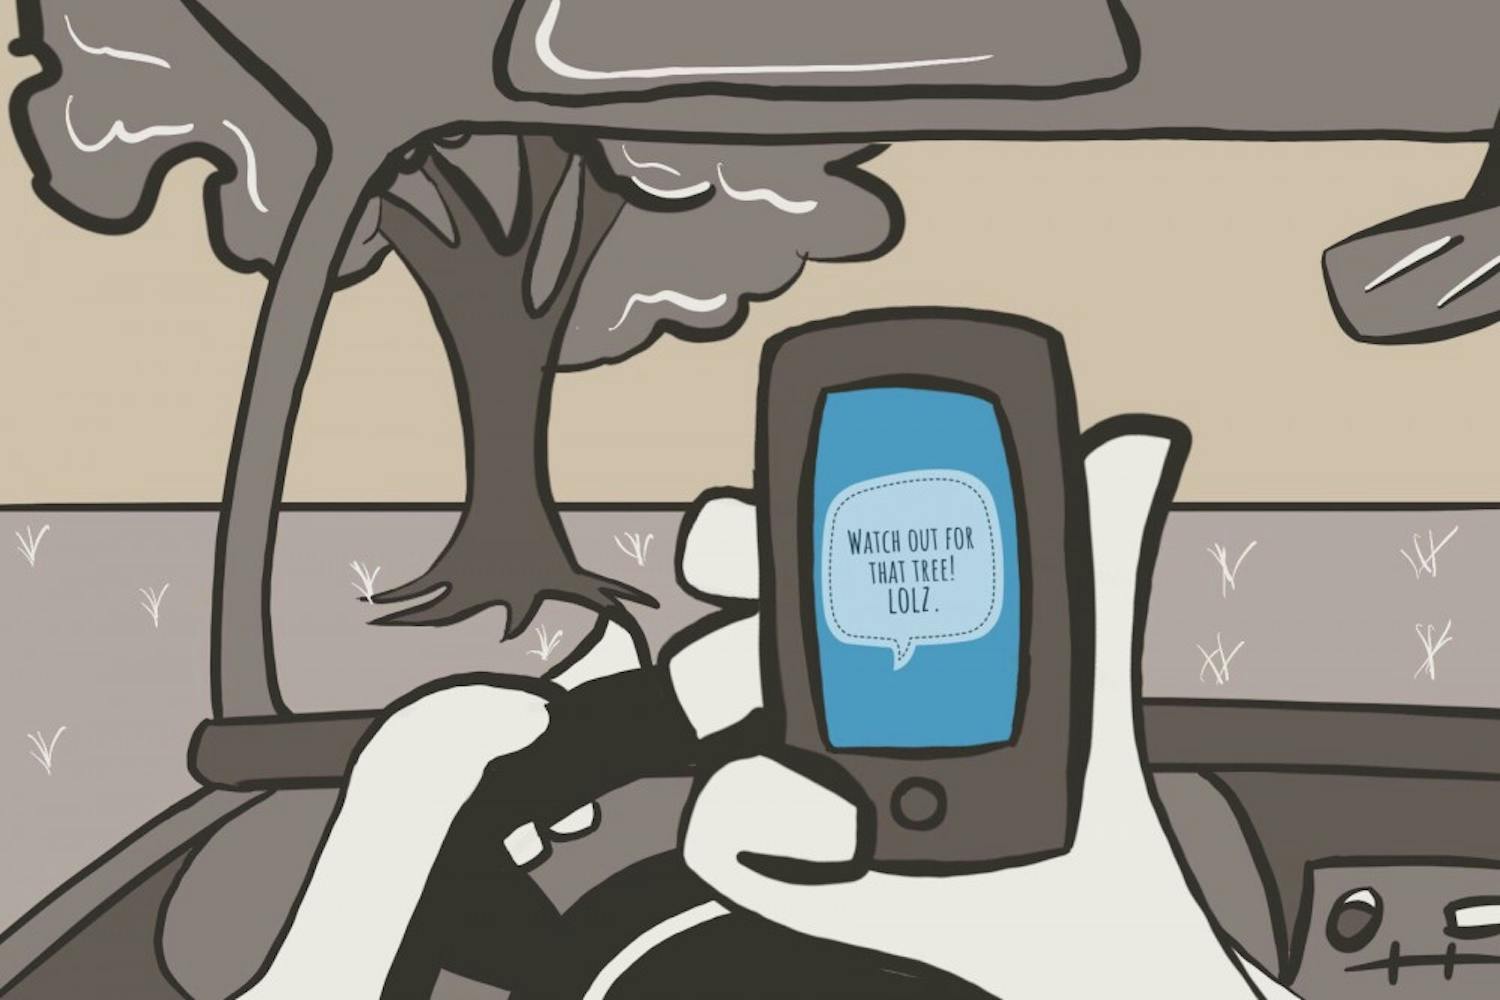 "Distracted driving can be just as dangerous as drunk driving." Illustration published on Thursday, April 27, 2017.